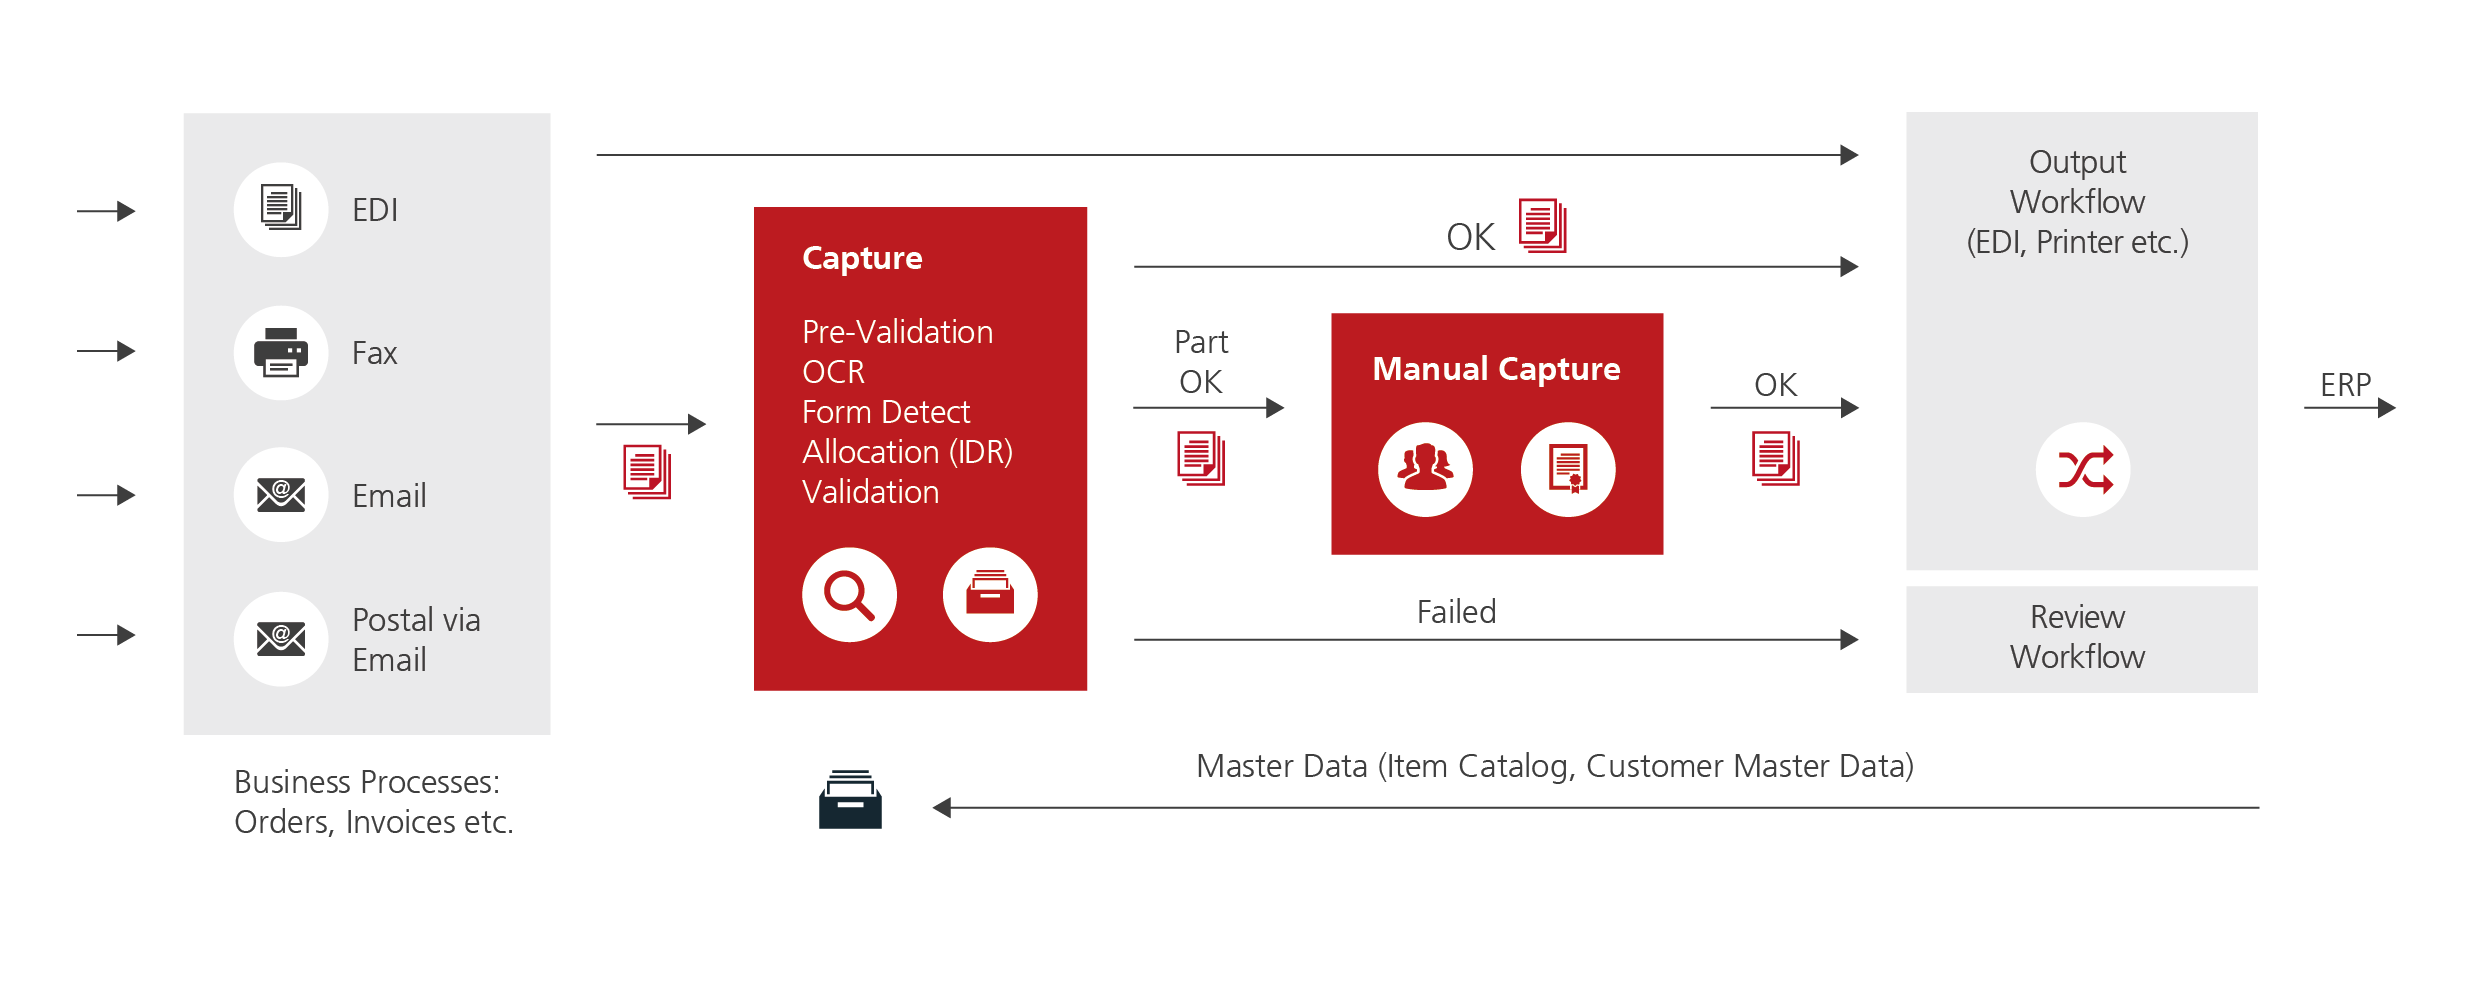 New Retarus ‘Managed Capture Services’ facilitate smooth data interchange and reduced costs and efforts due to ‘Intelligent Document Recognition’